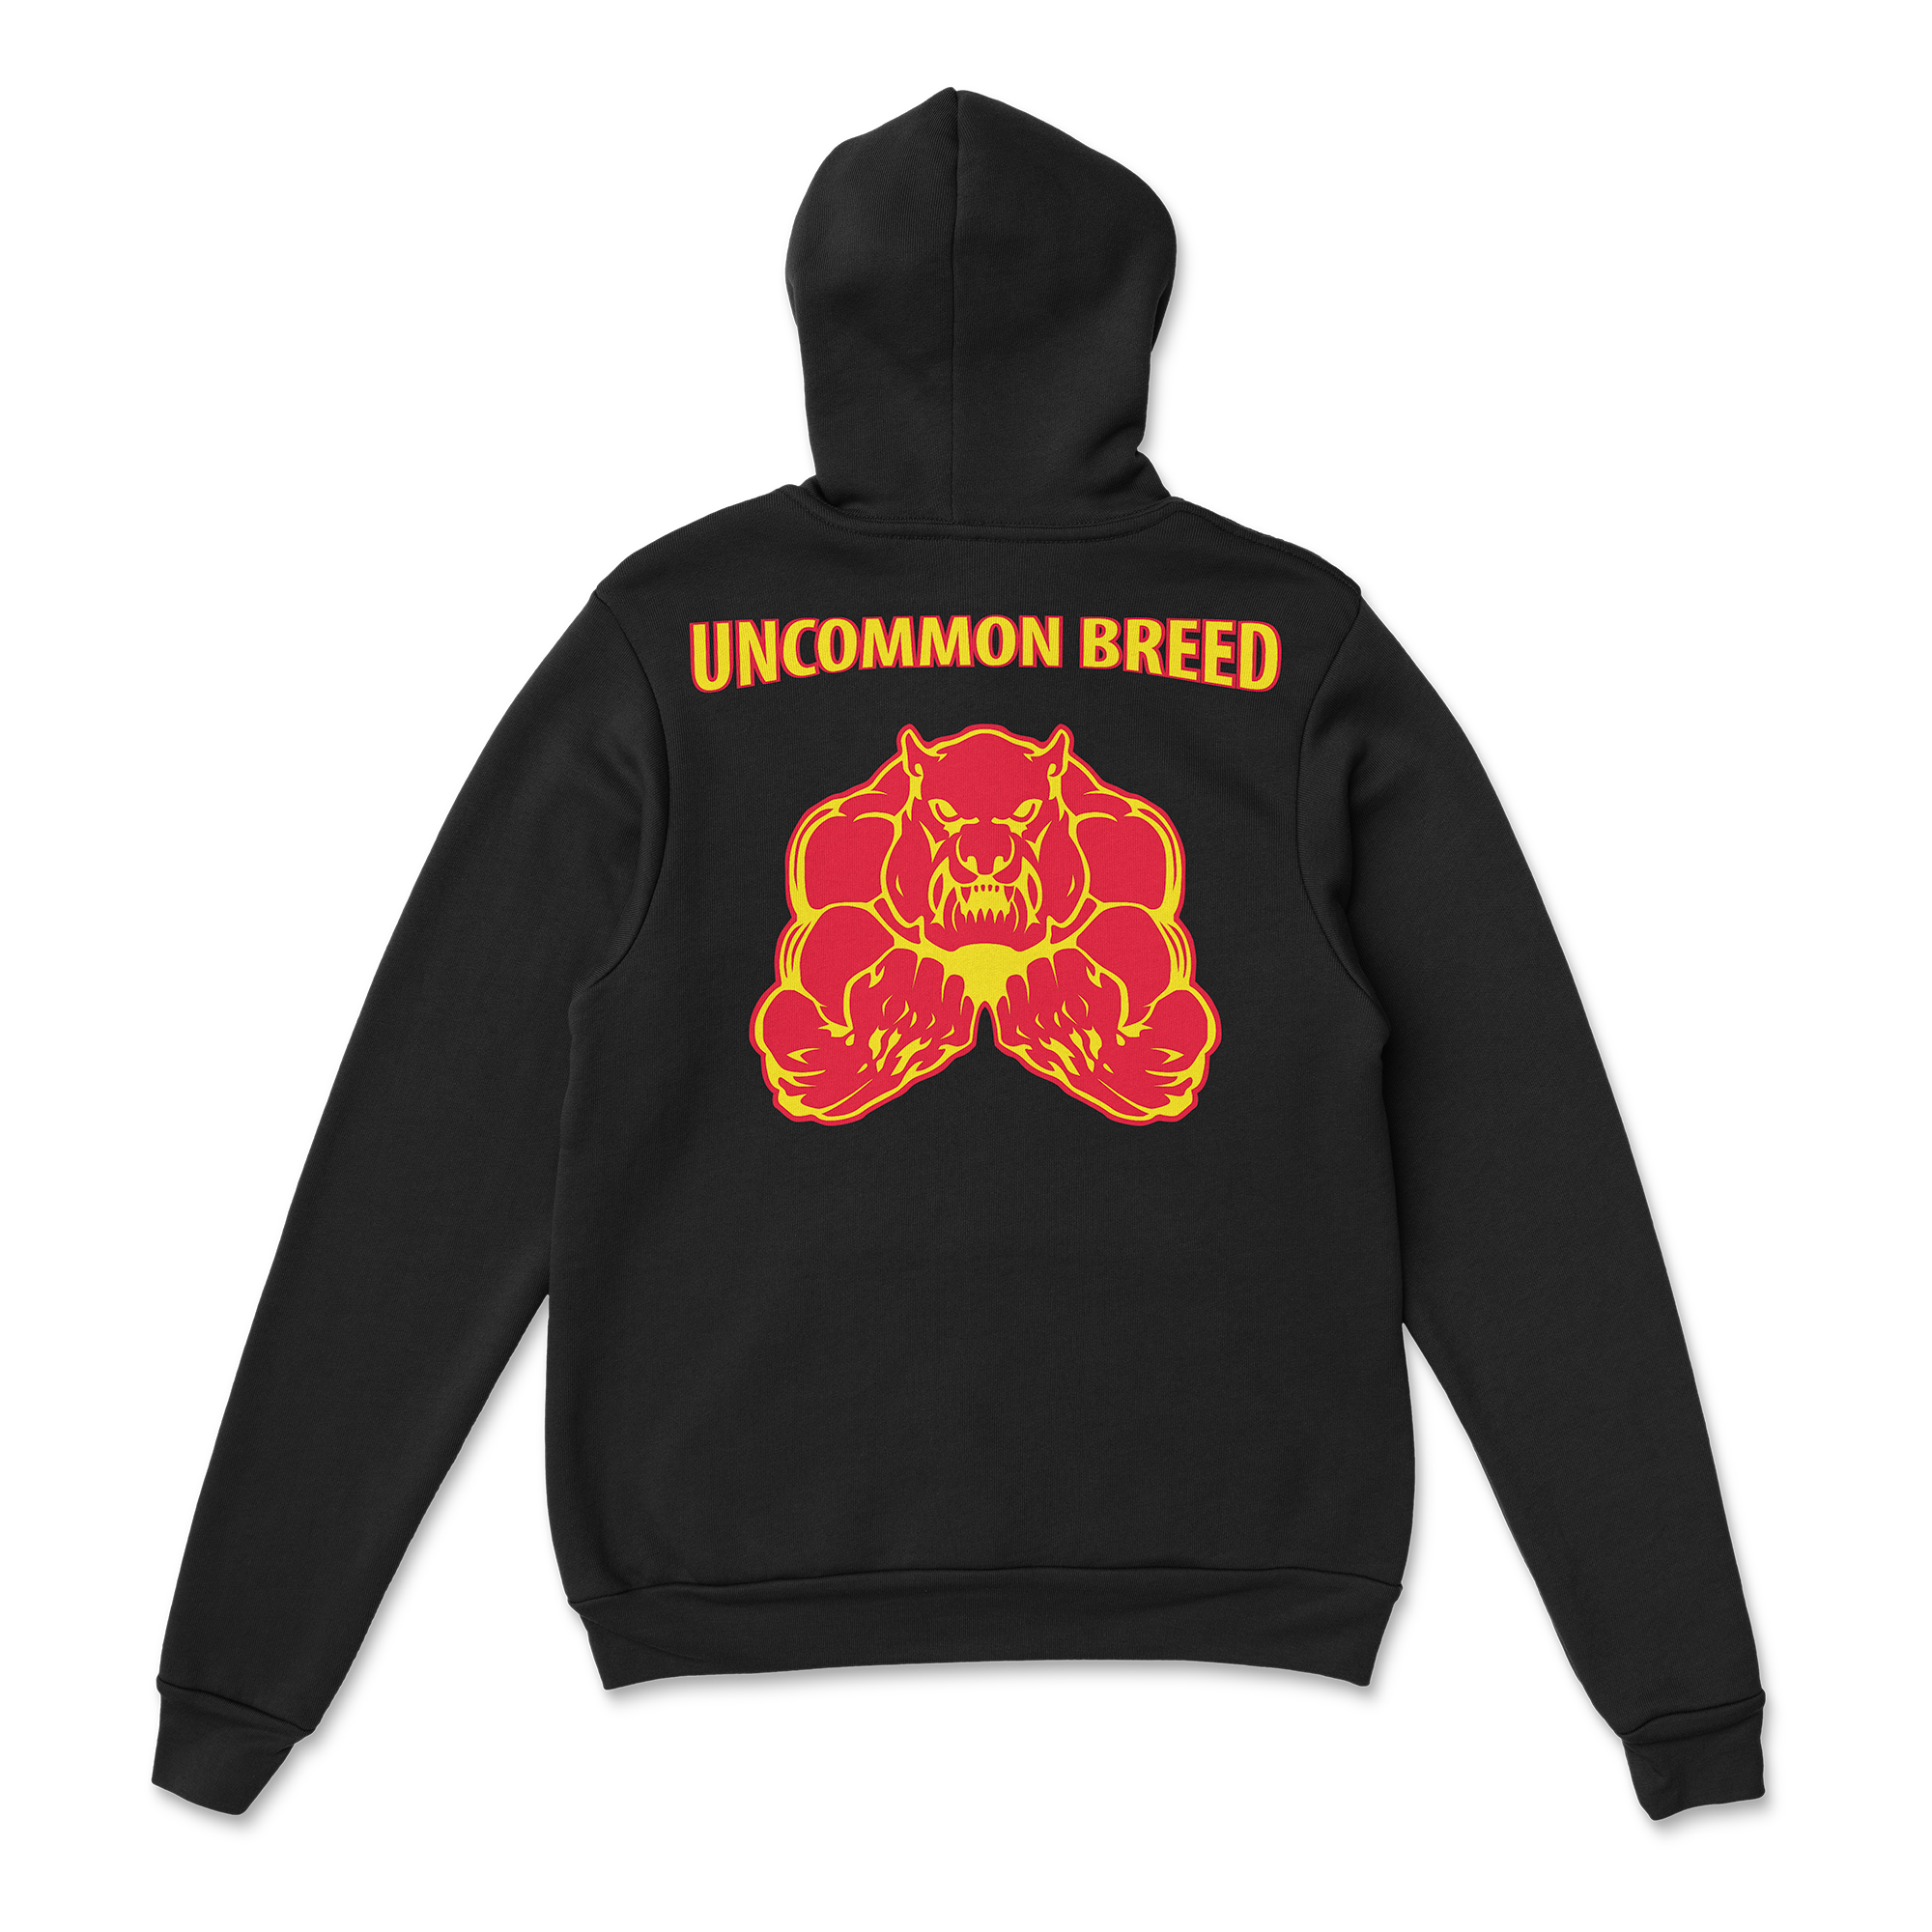 One 2 One Fitness - Uncommon Breed Unisex Hoodie